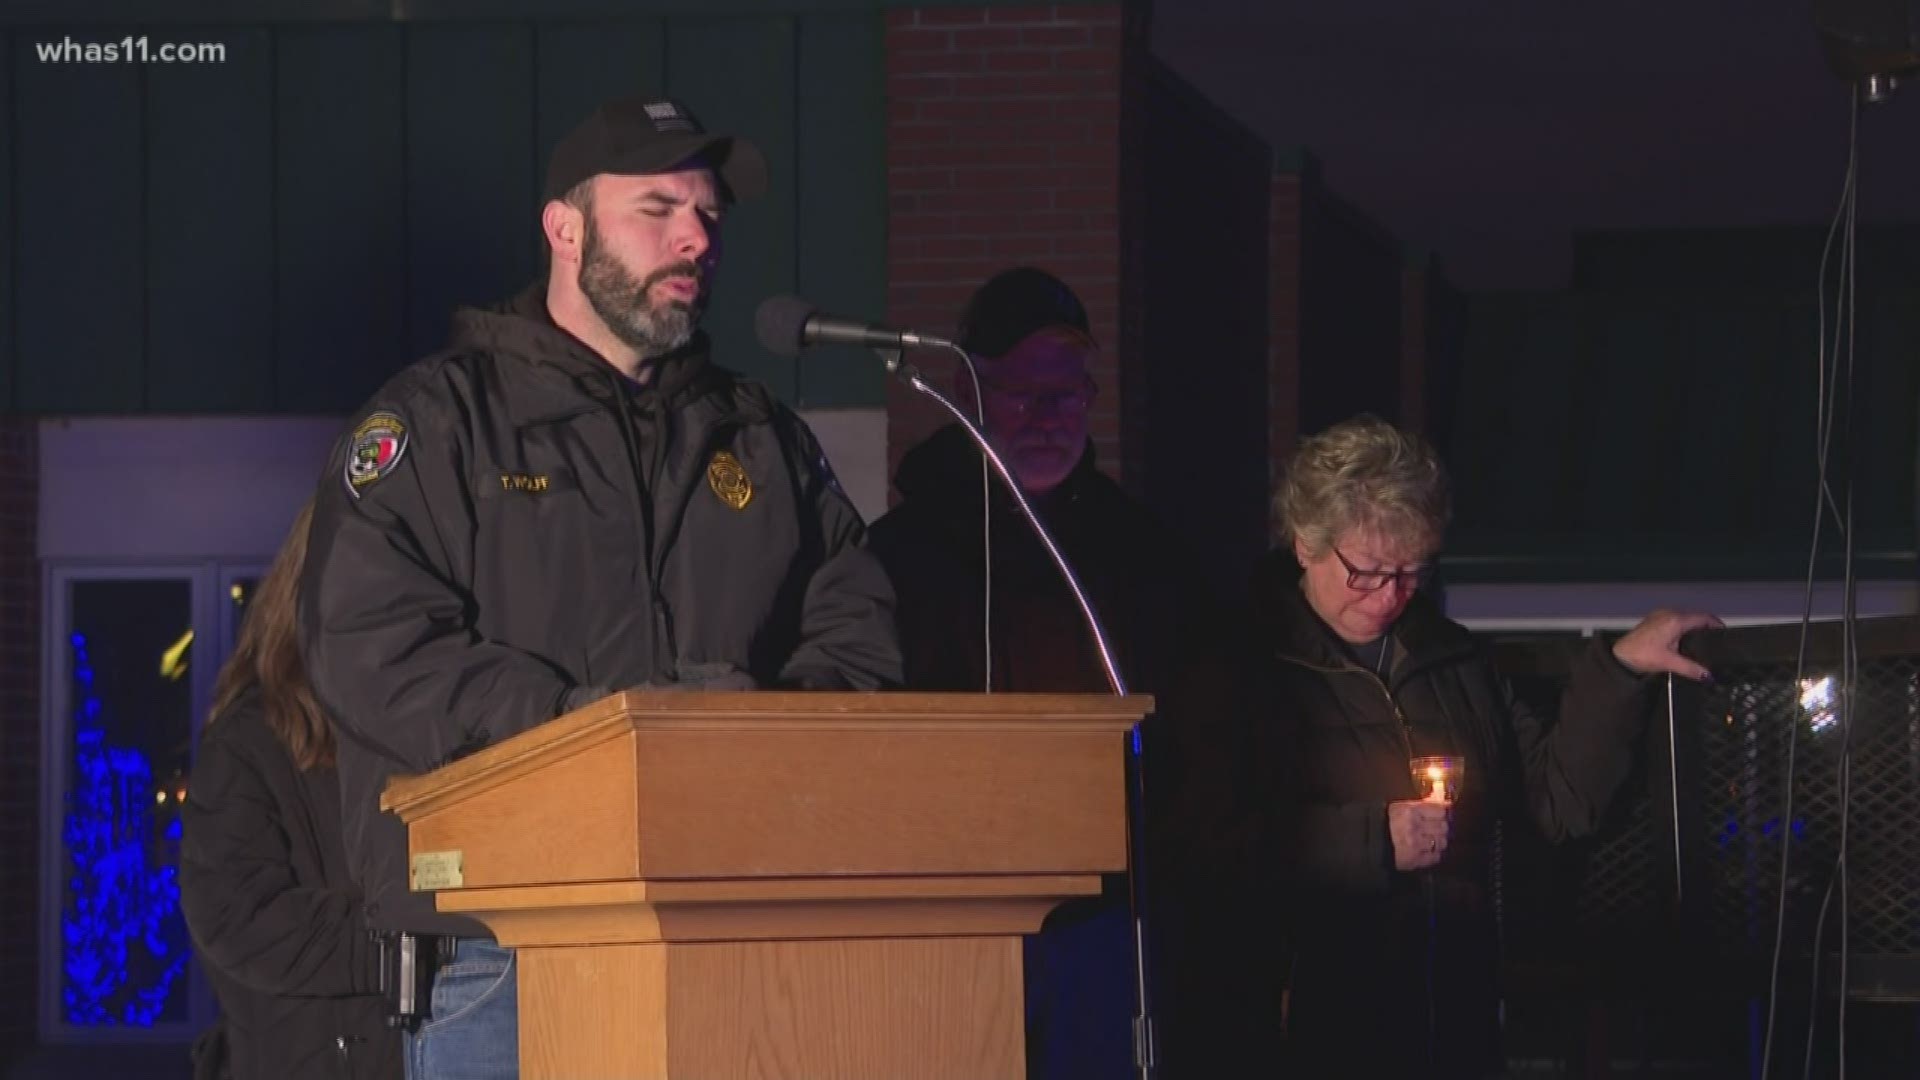 Sgt. Bertram was honored in Charlestown, Ind. one year after he was killed during a police chase.